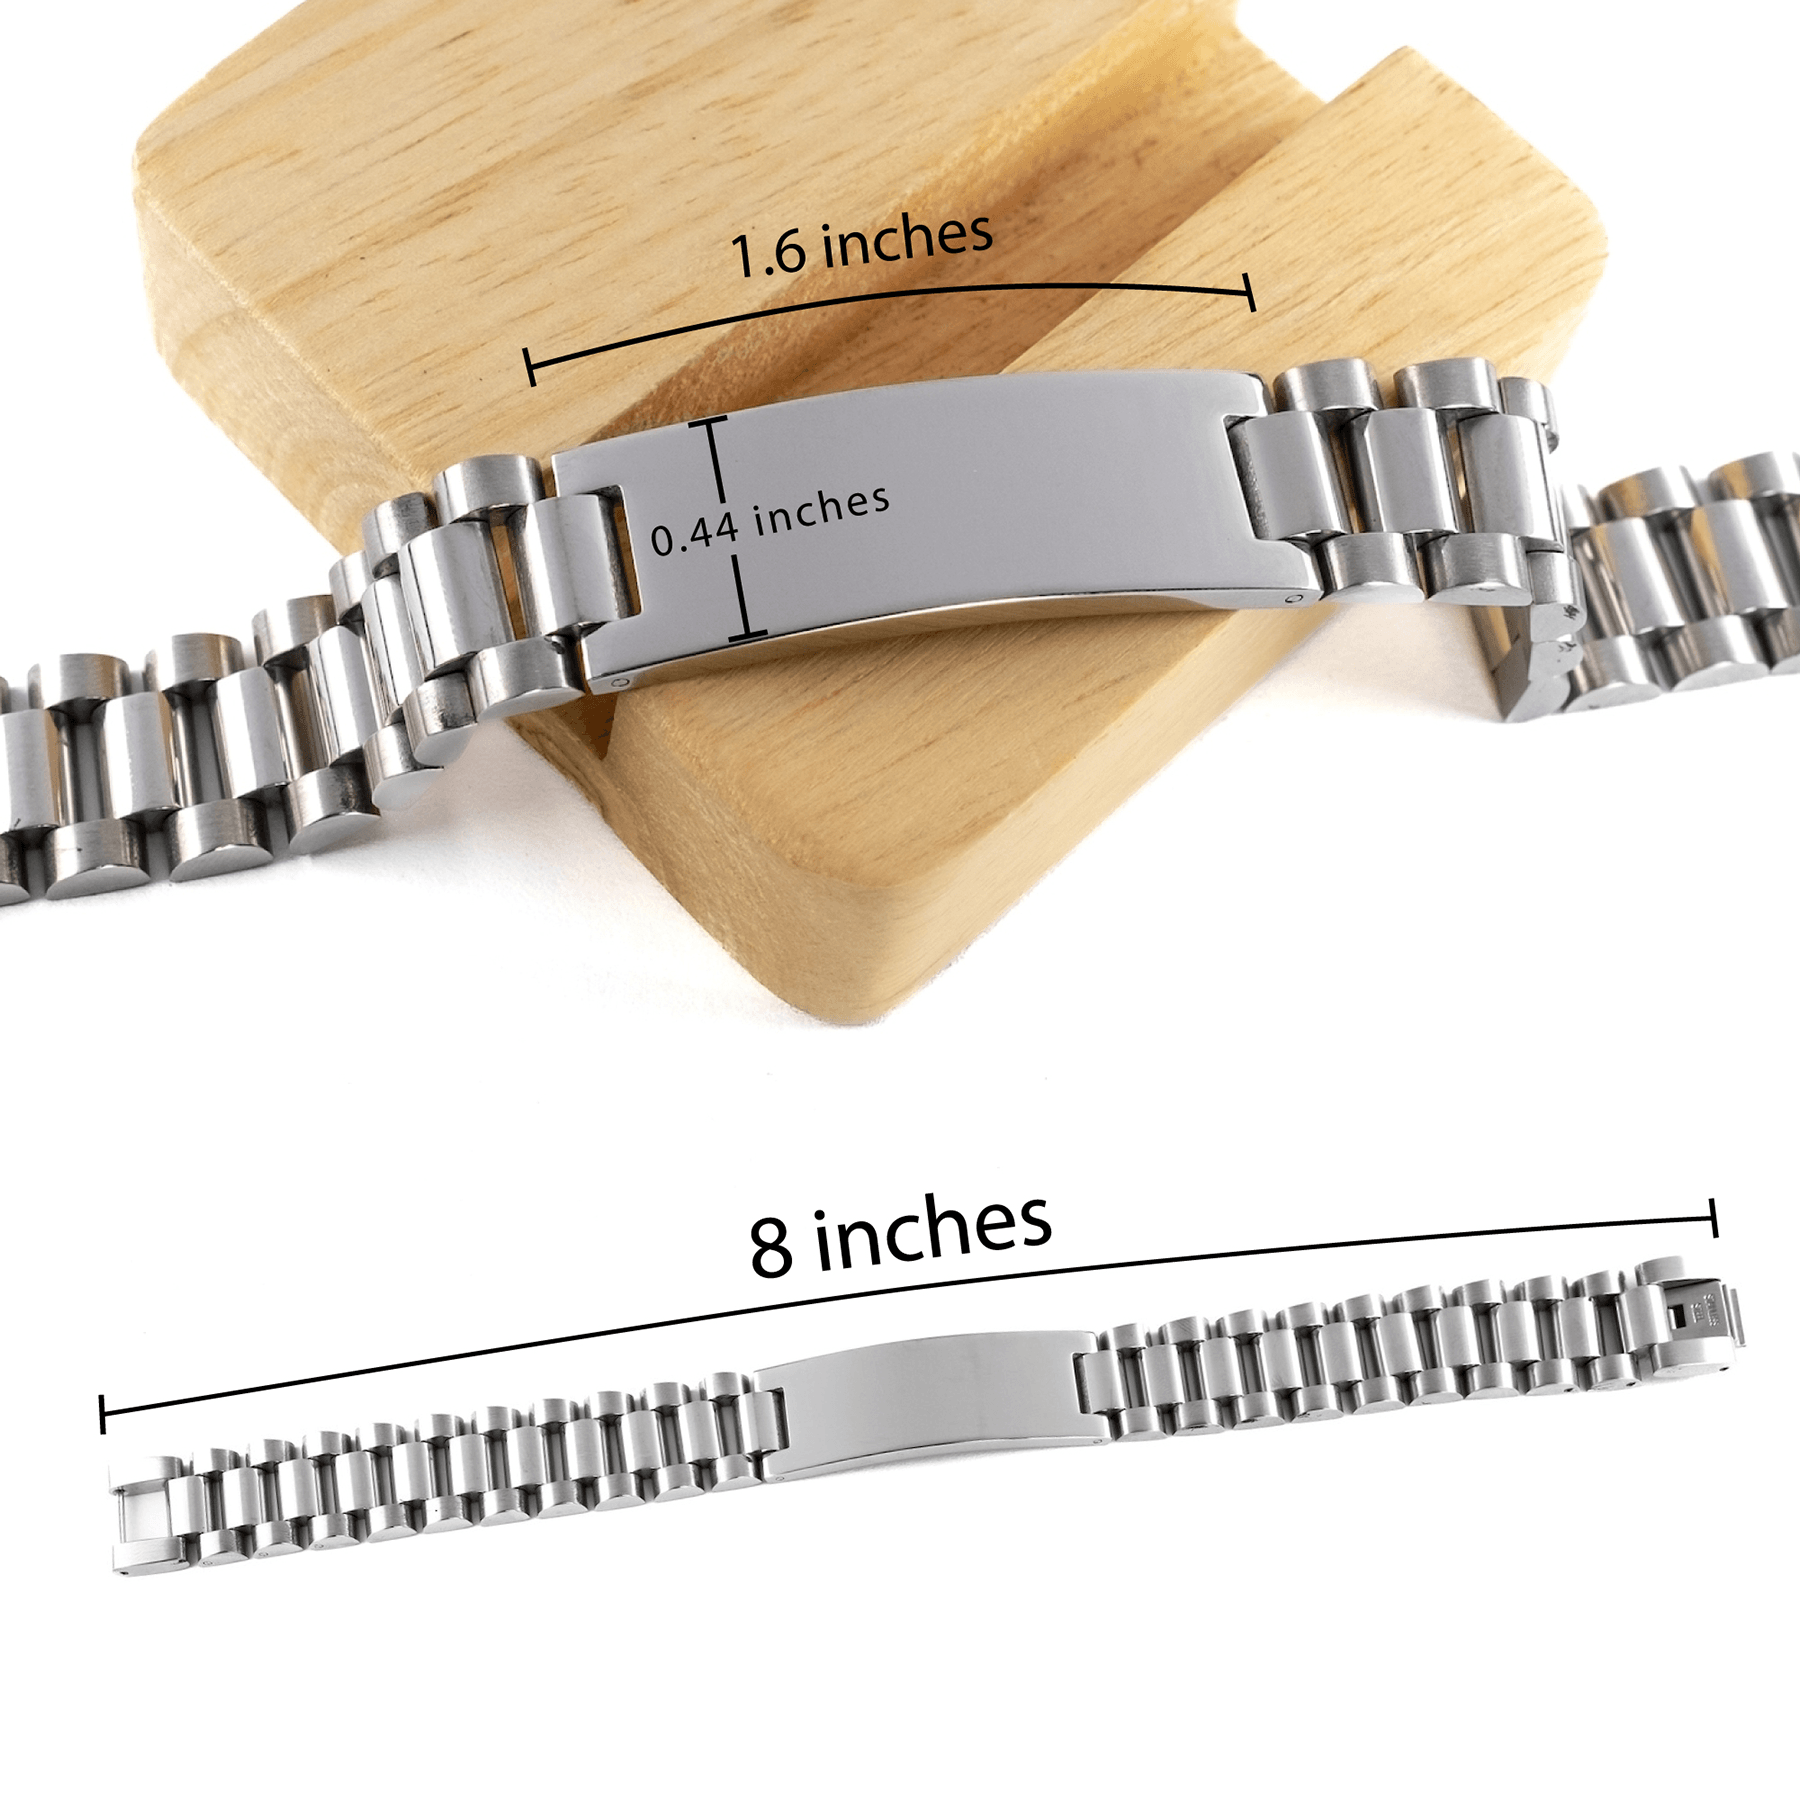 Correctional Officer Ladder Stainless Steel Engraved Bracelet - Thanks for being who you are - Birthday Christmas Jewelry Gifts Coworkers Colleague Boss - Mallard Moon Gift Shop